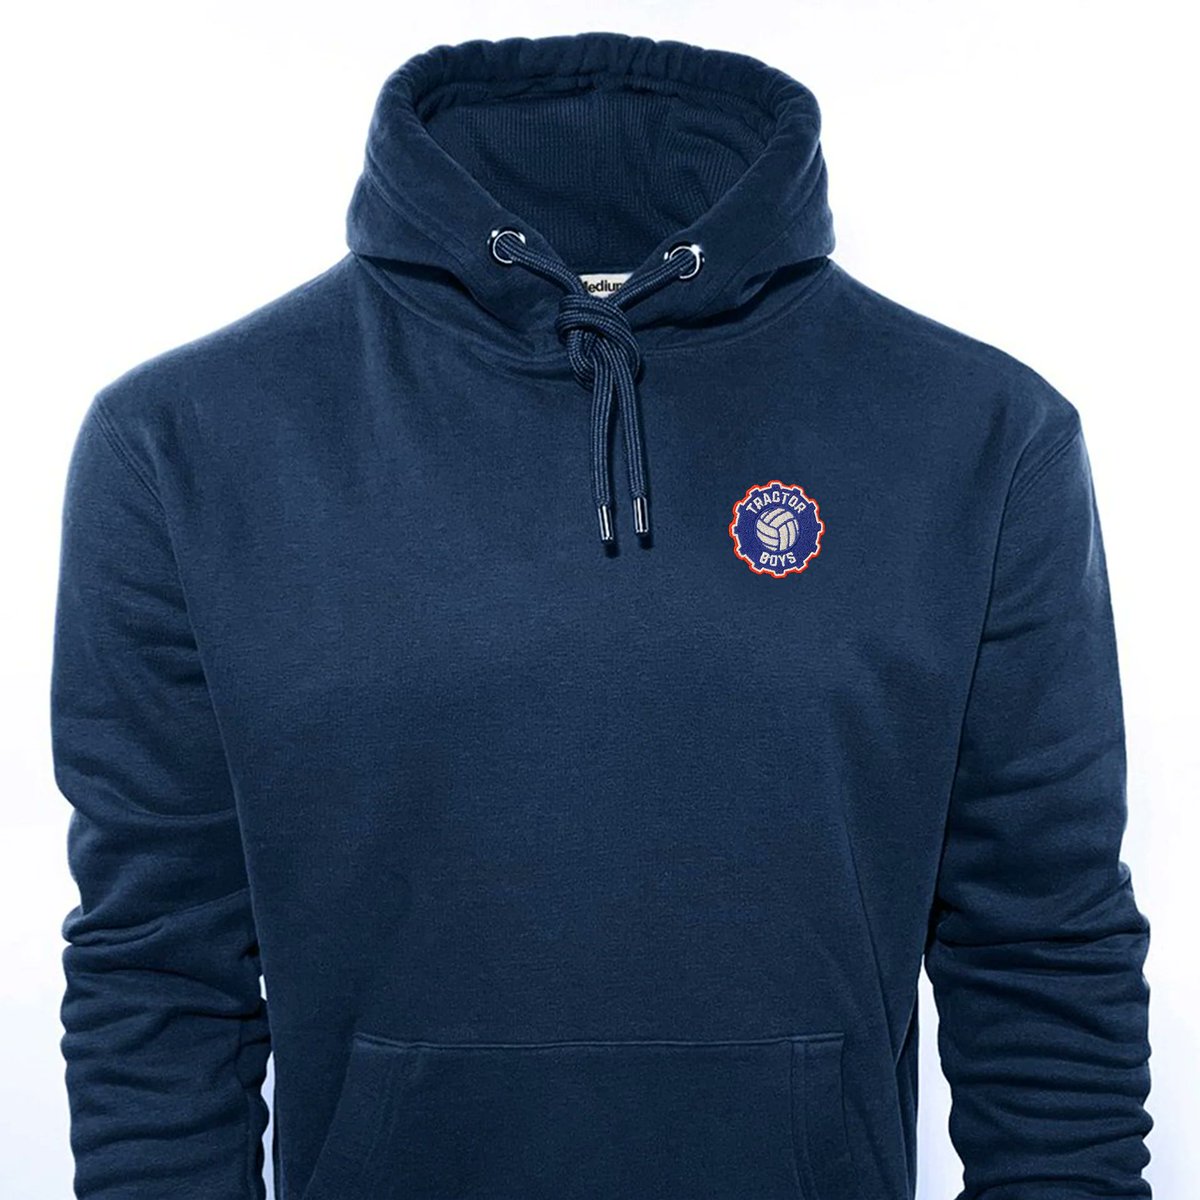 Made from luxury materials, with a brushed fleece inner, to keep you warm on the terraces on matchday ⚽ Shop now 👉 thetractorboys.com/shop/Hoodies #ITFC